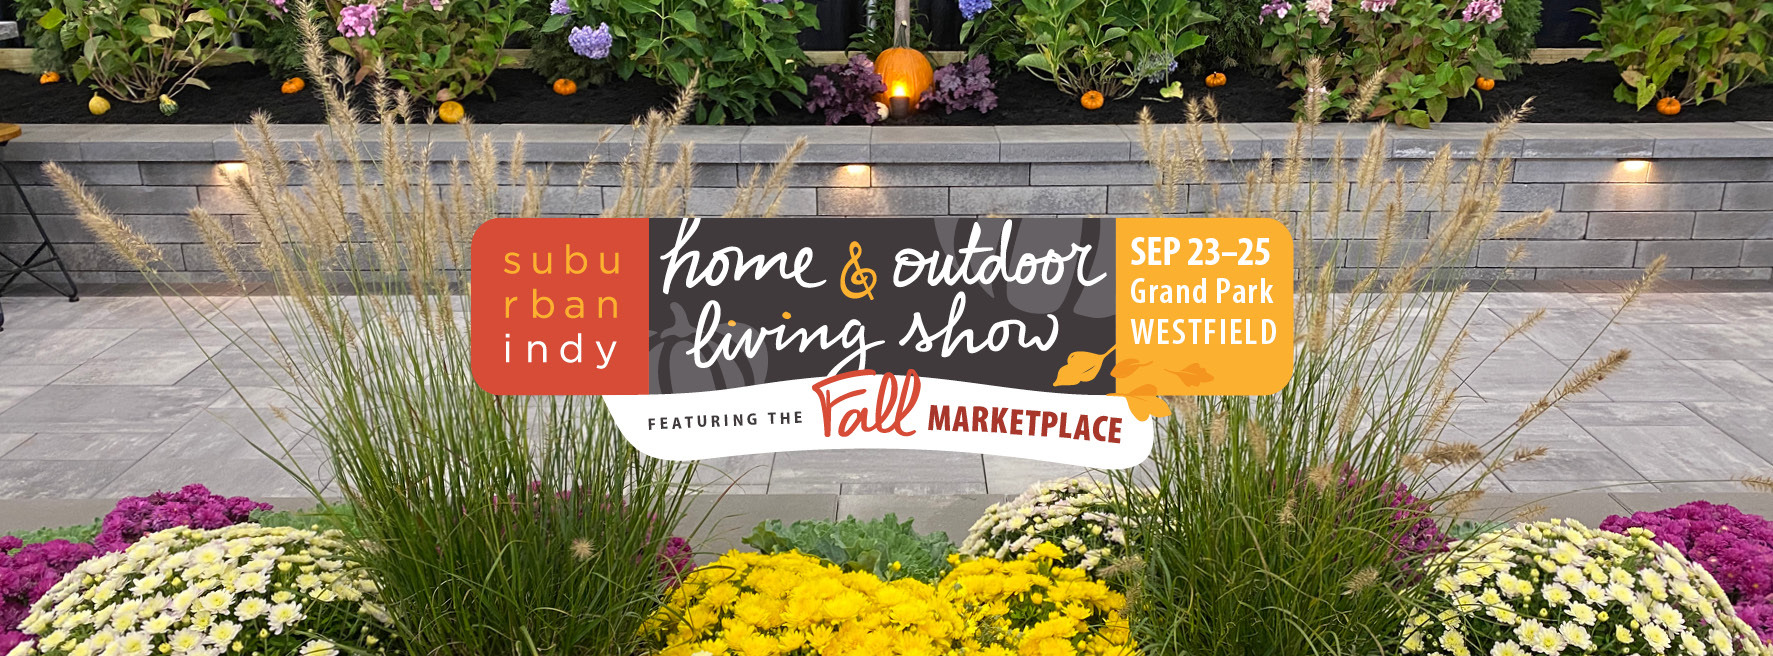 Suburban Indy Home & Outdoor Living Show